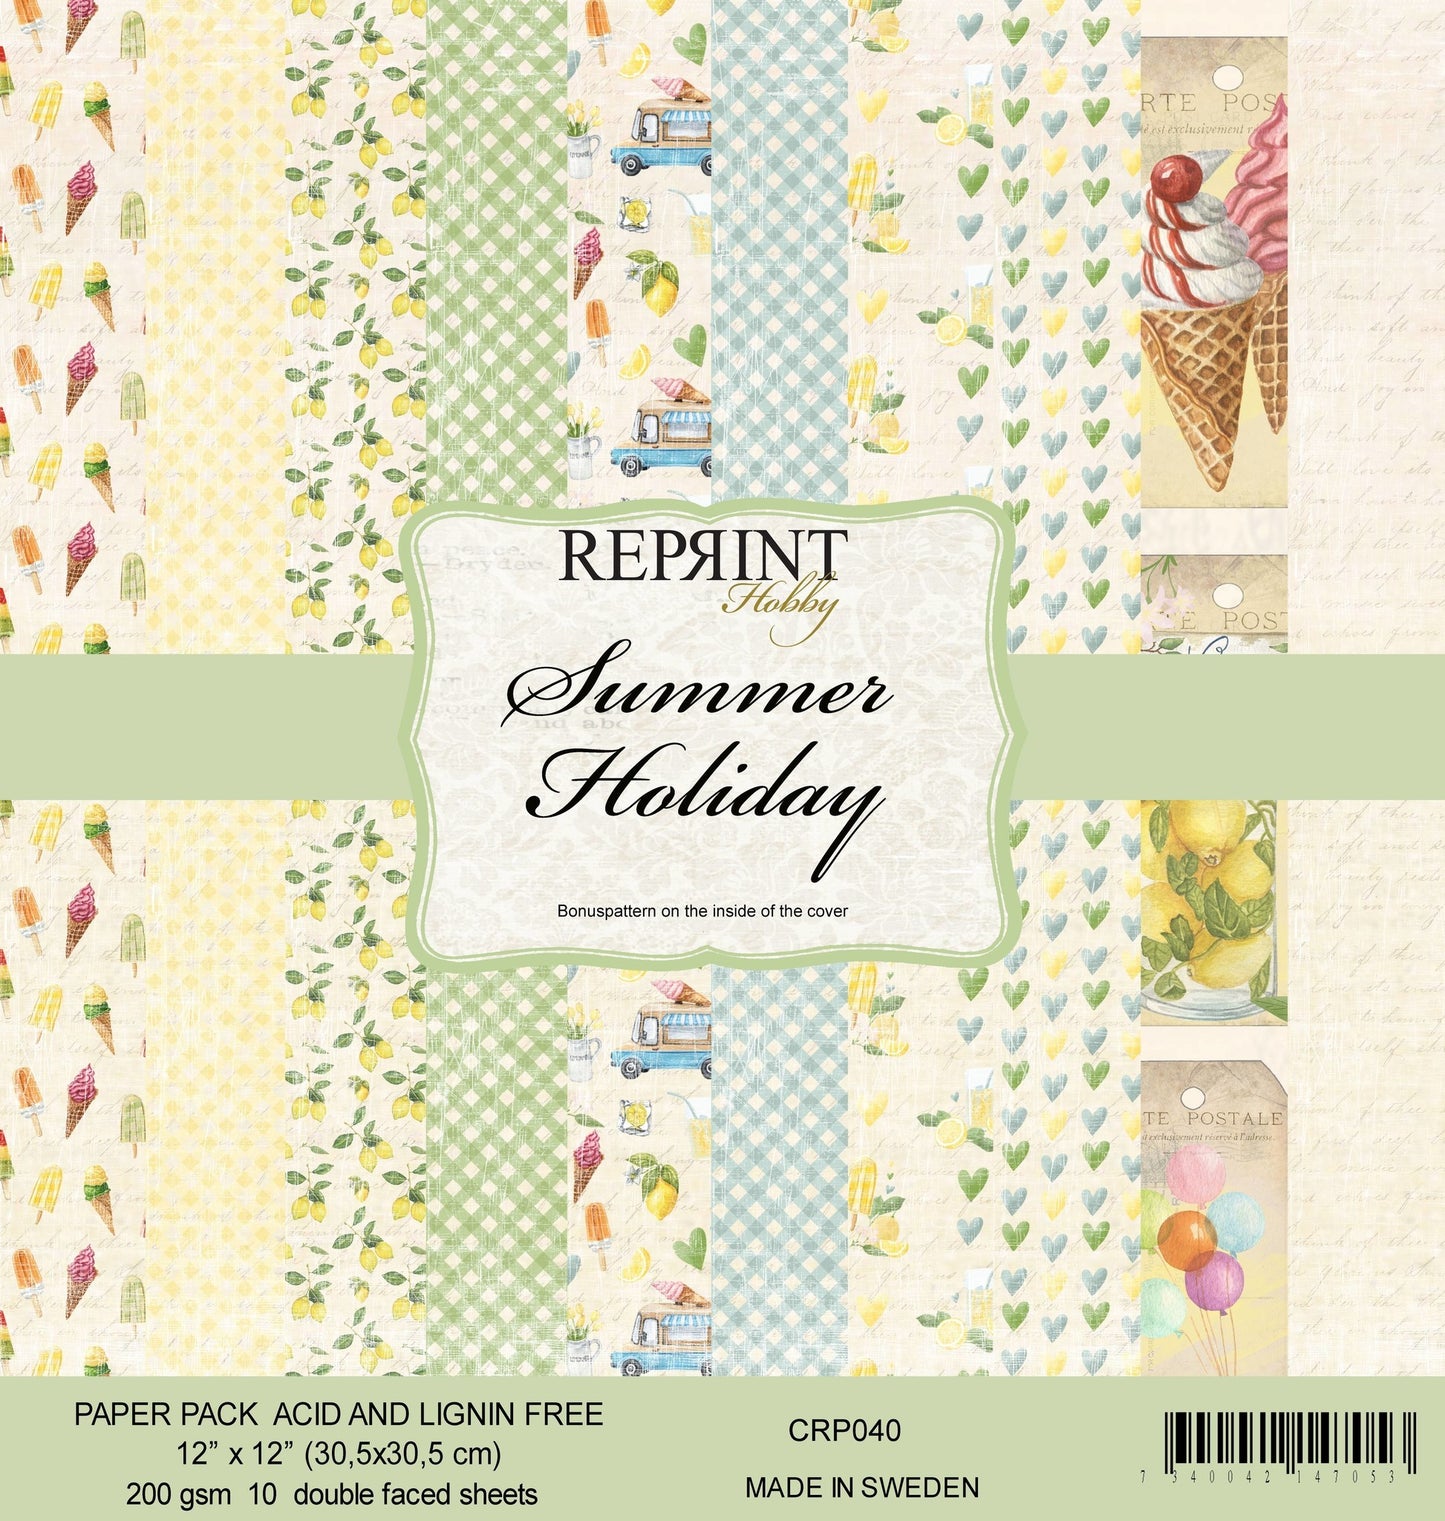 Reprint Summer Holiday Collection 6x6 Inch Paper Pack (RPP057)